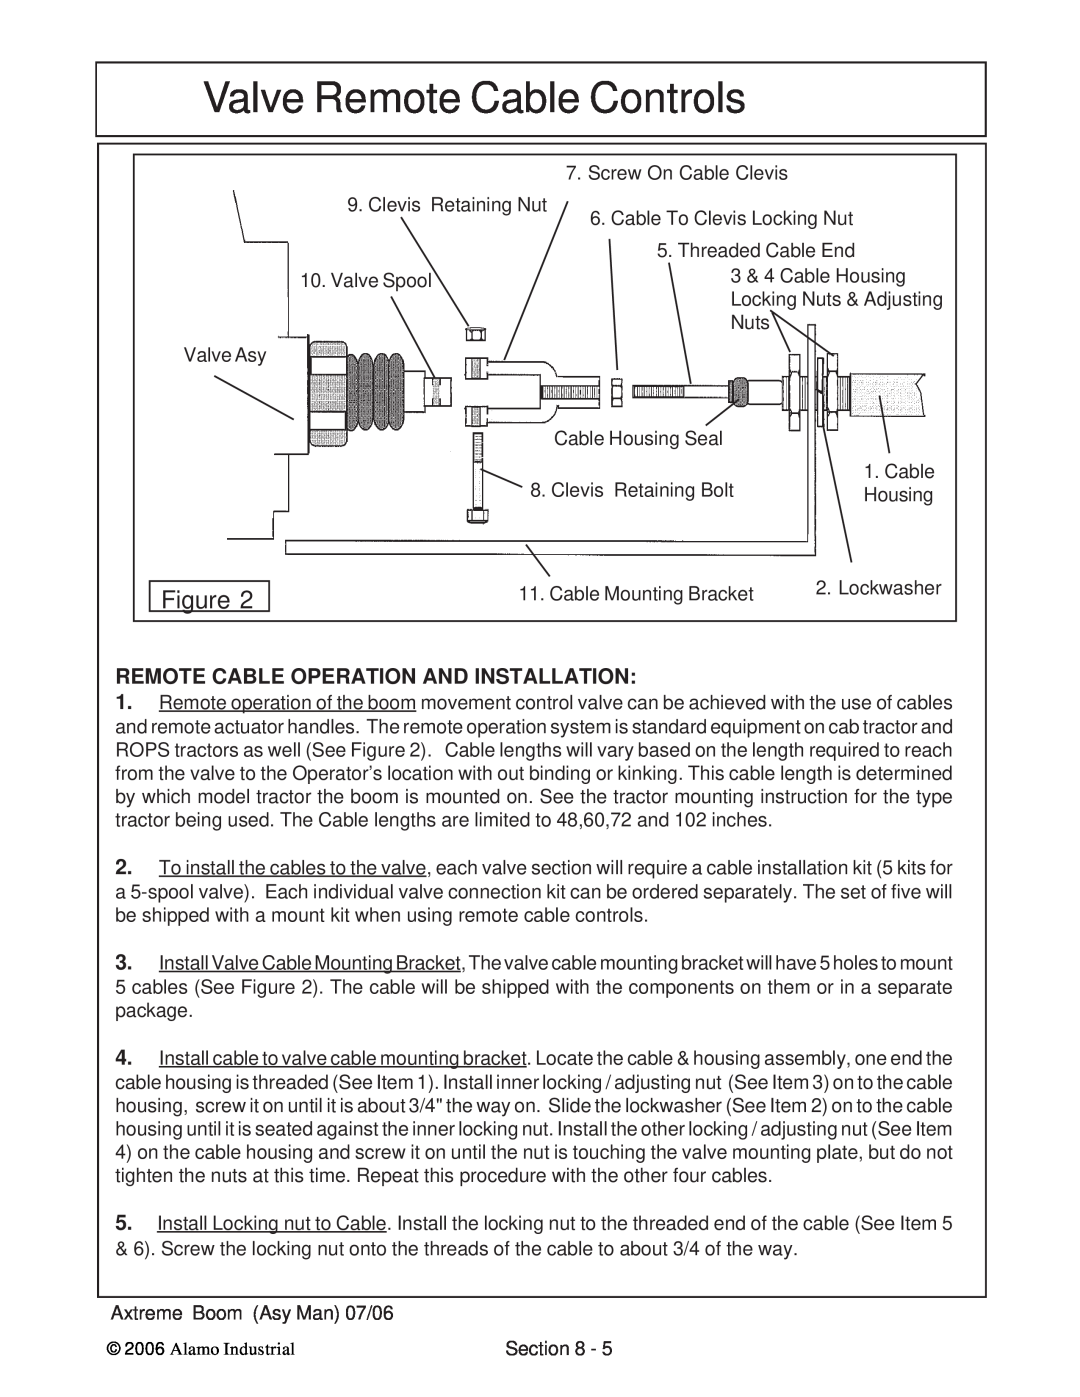 Alamo 02984405 instruction manual Valve Remote Cable Controls, Remote Cable Operation And Installation 